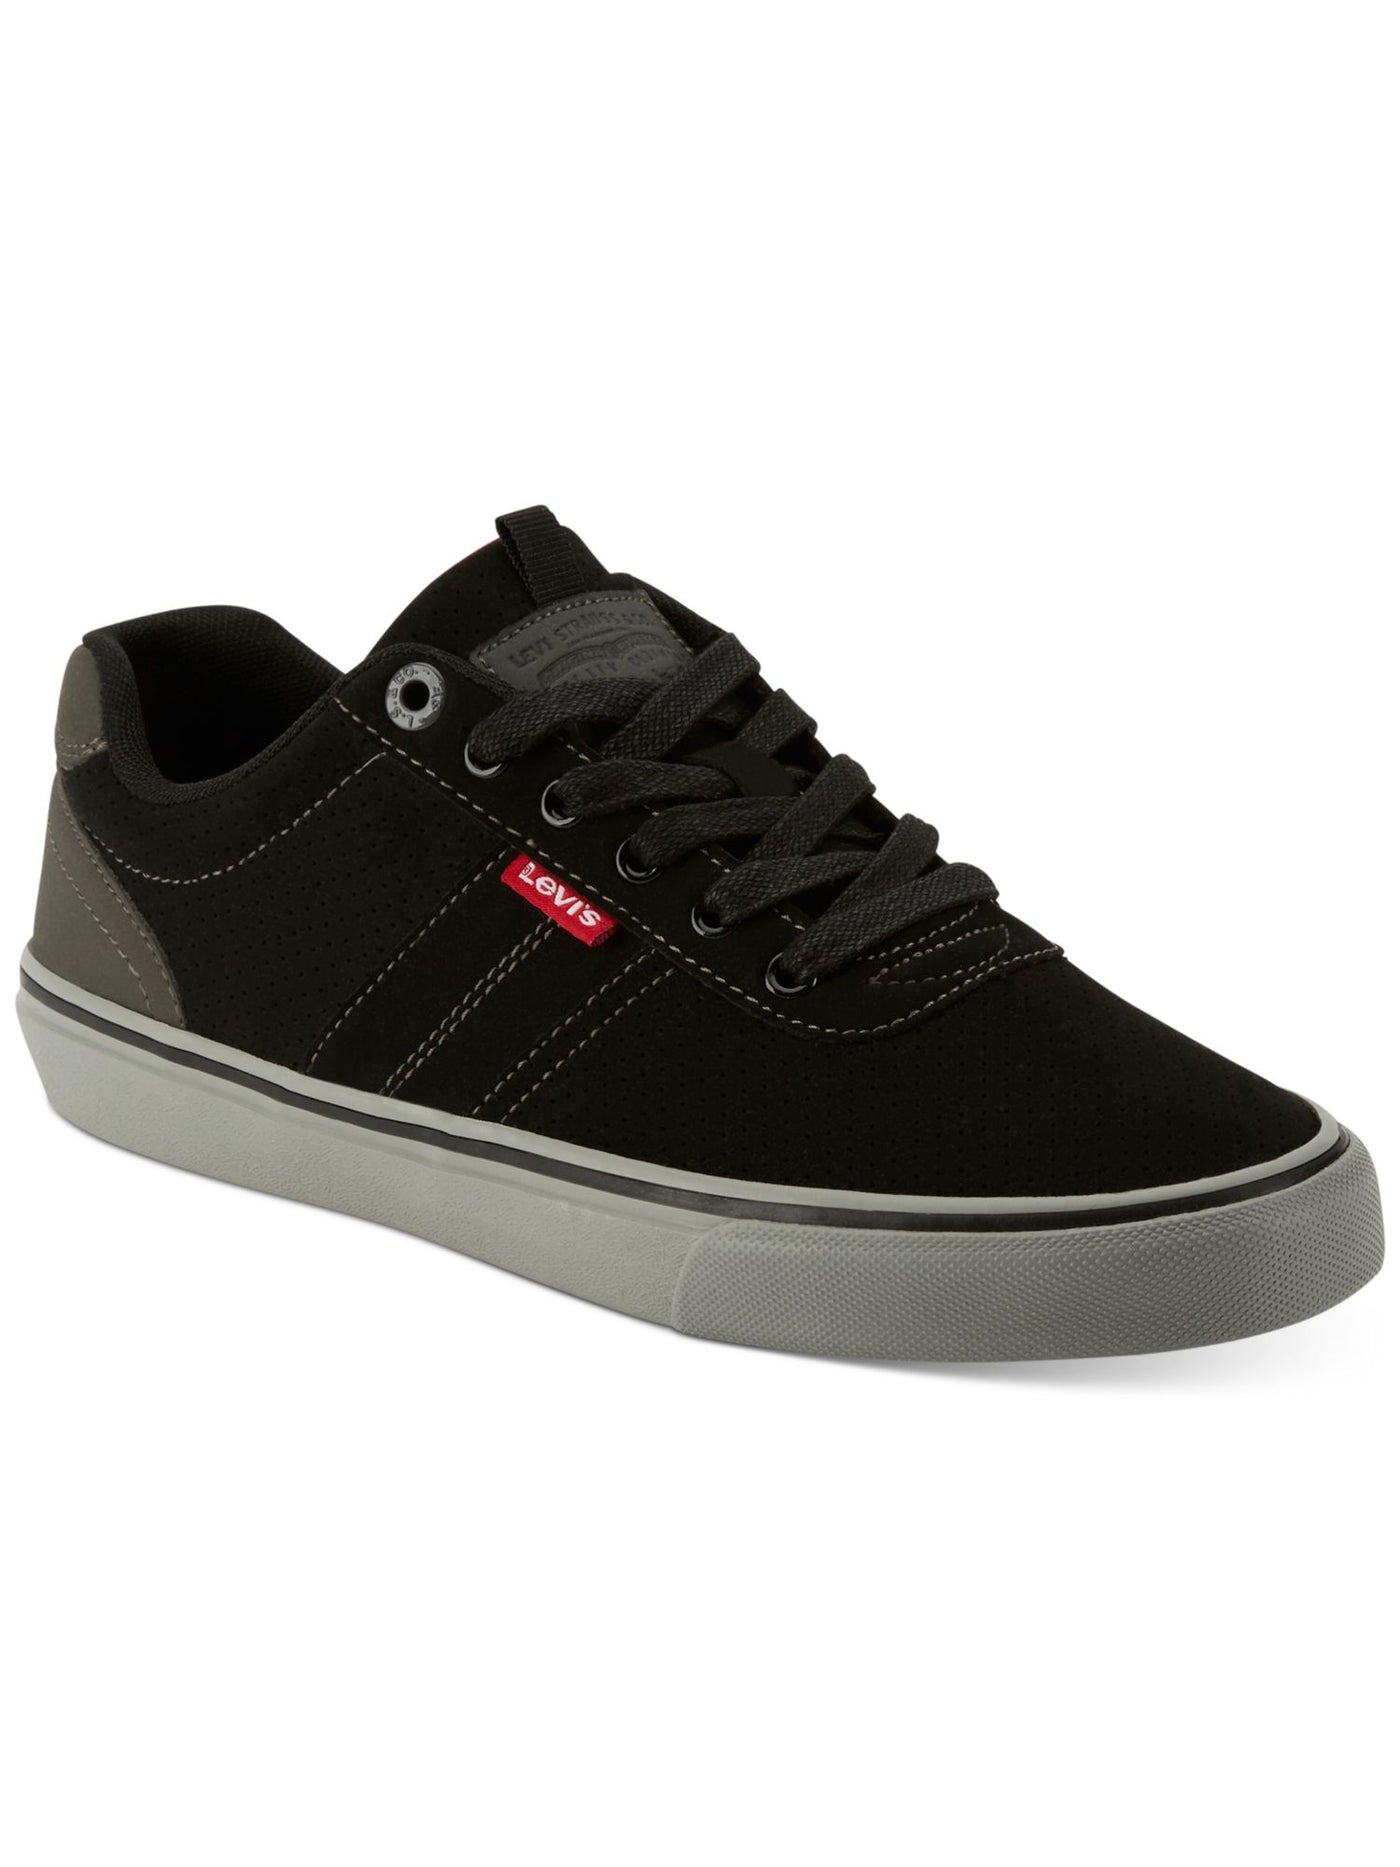 LEVI'S Mens Black Perforated Cushioned Miles Round Toe Lace-Up Sneakers Shoes 10.5